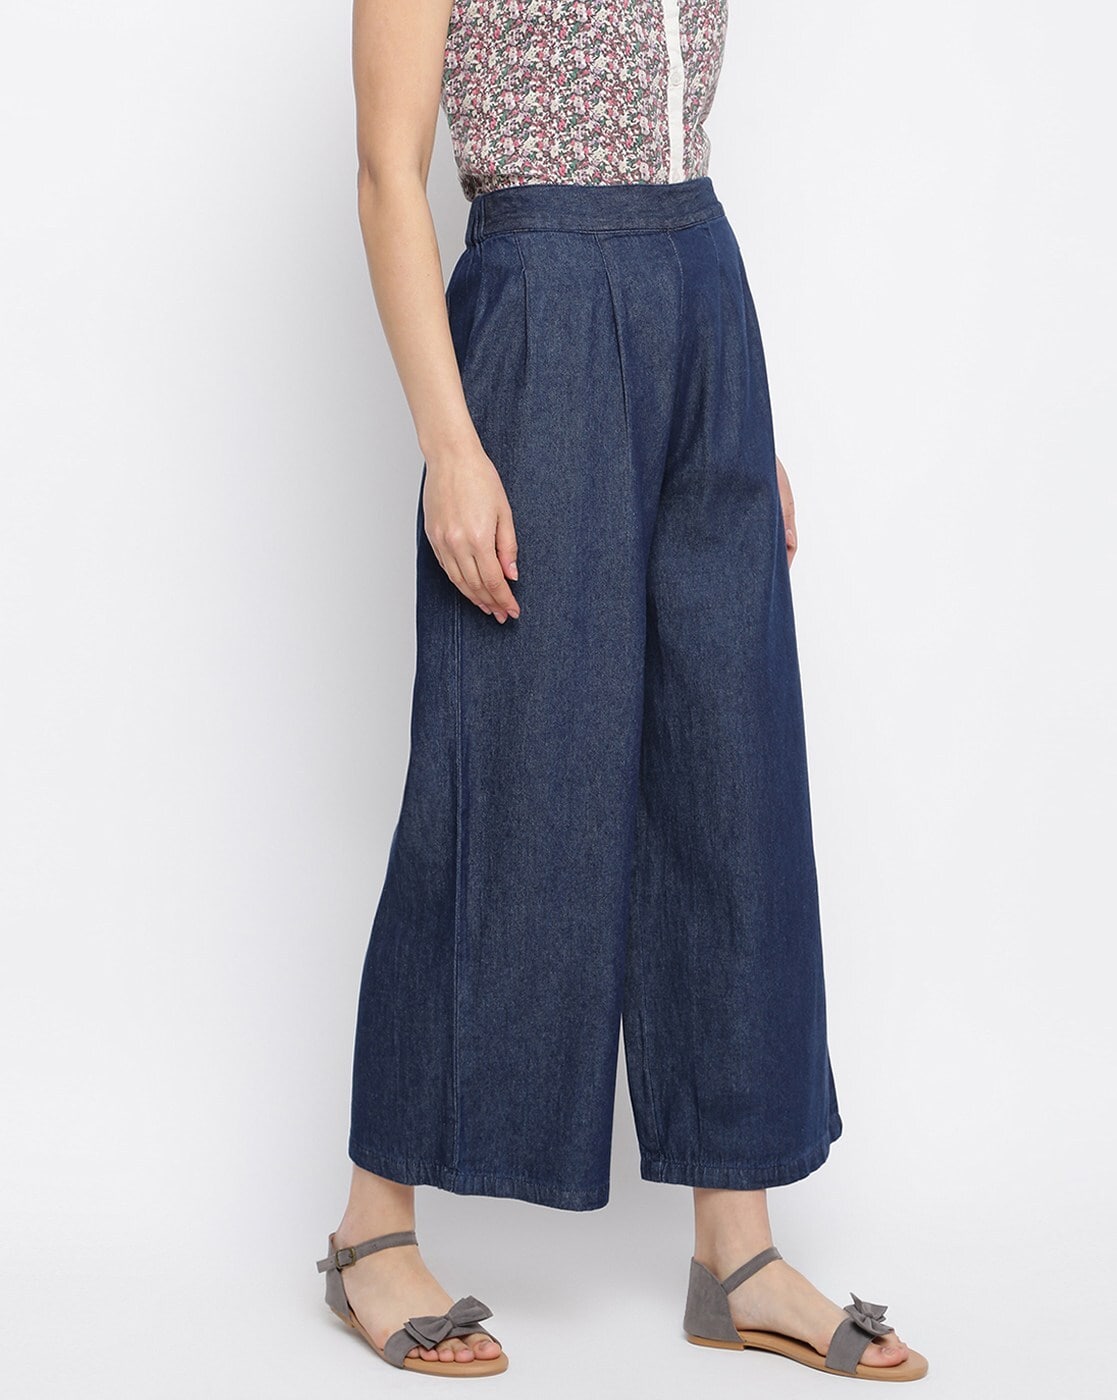 NINE IN THE MORNING: PANTS AND SHORTS, NINE IN THE MORNING DEEPA PALAZZO  JEANS